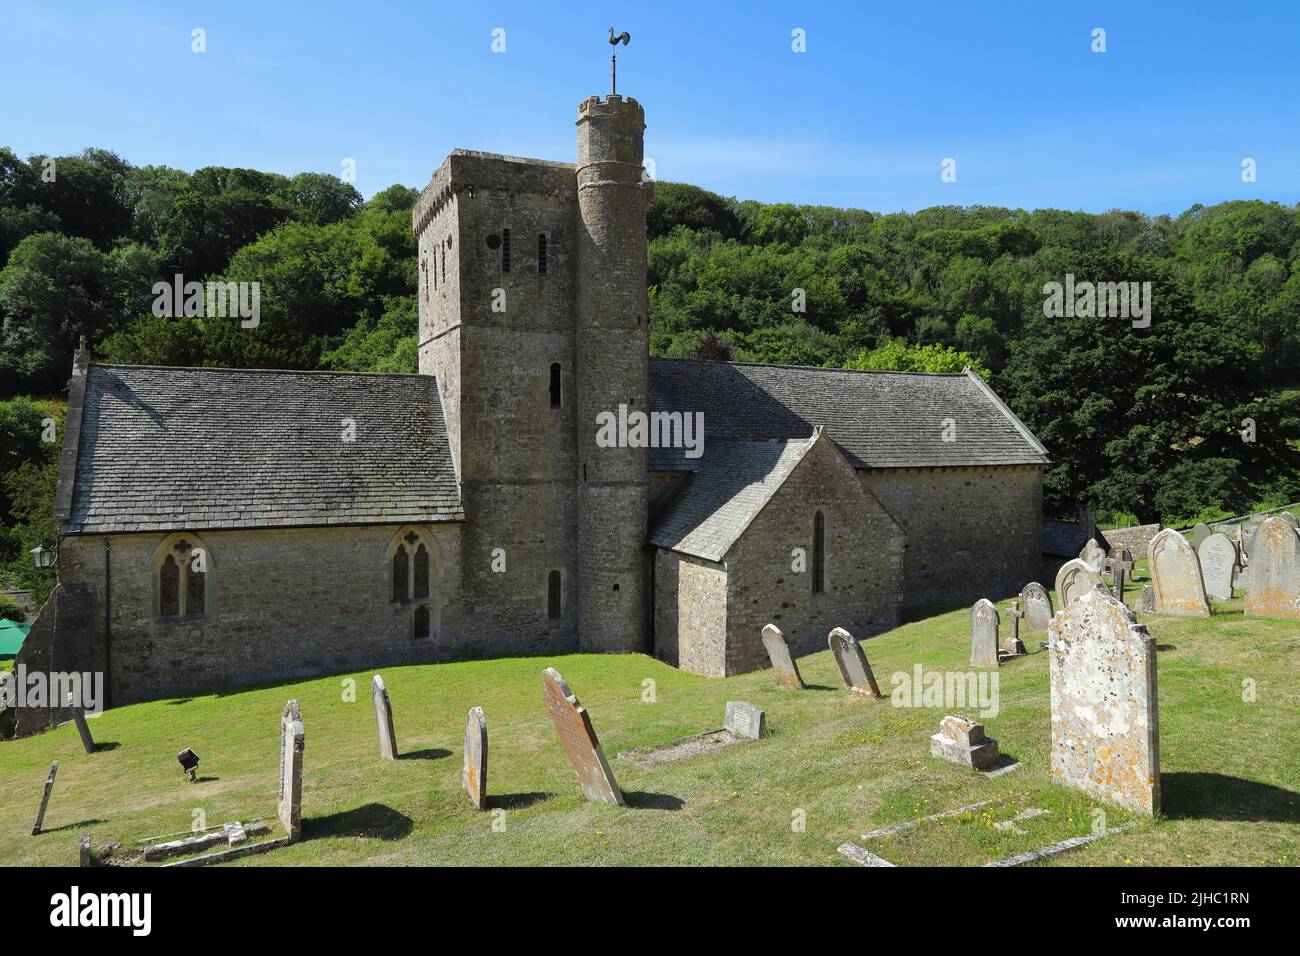 Saint Winifred's Church in Branscombe in Devon, England. The church is dedicated to Saint Winifred, a Welsh saint and  dates back as far as about 995. Stock Photo